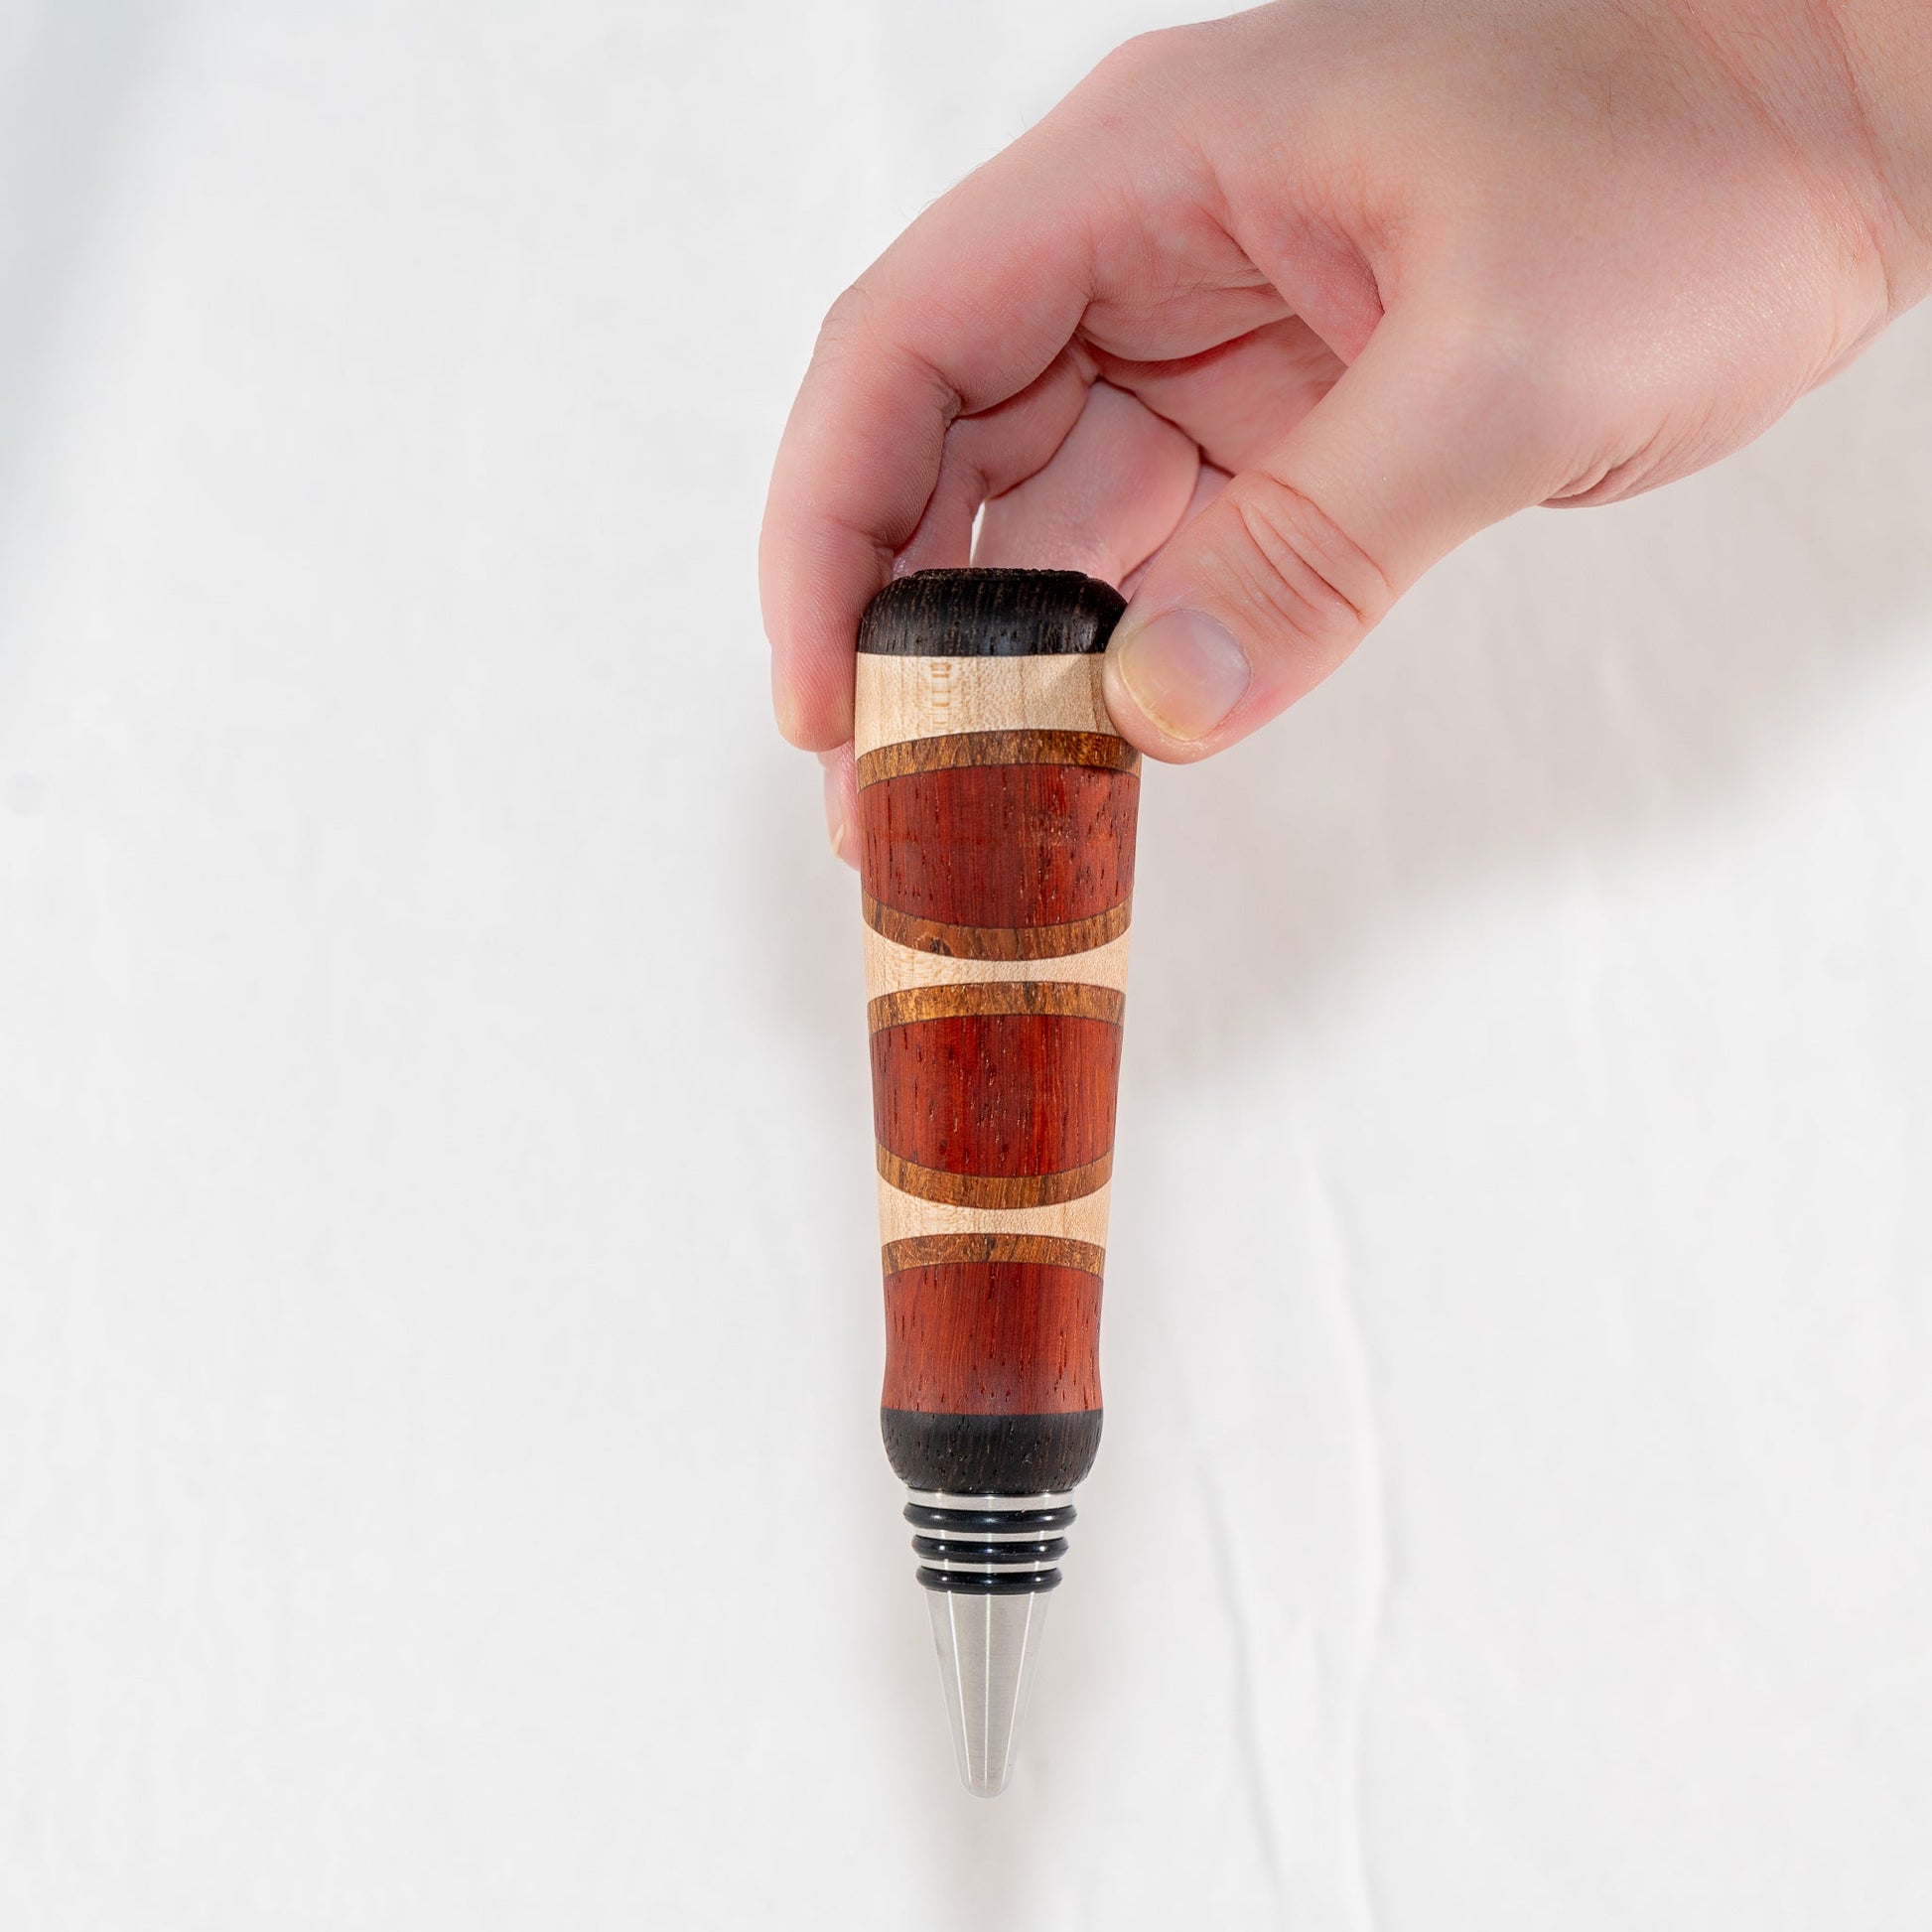 Handmade segmented wood bottle stopper of Padauk, Maple, Jatoba, and Wenge woods. Features a stainless steel dropper.